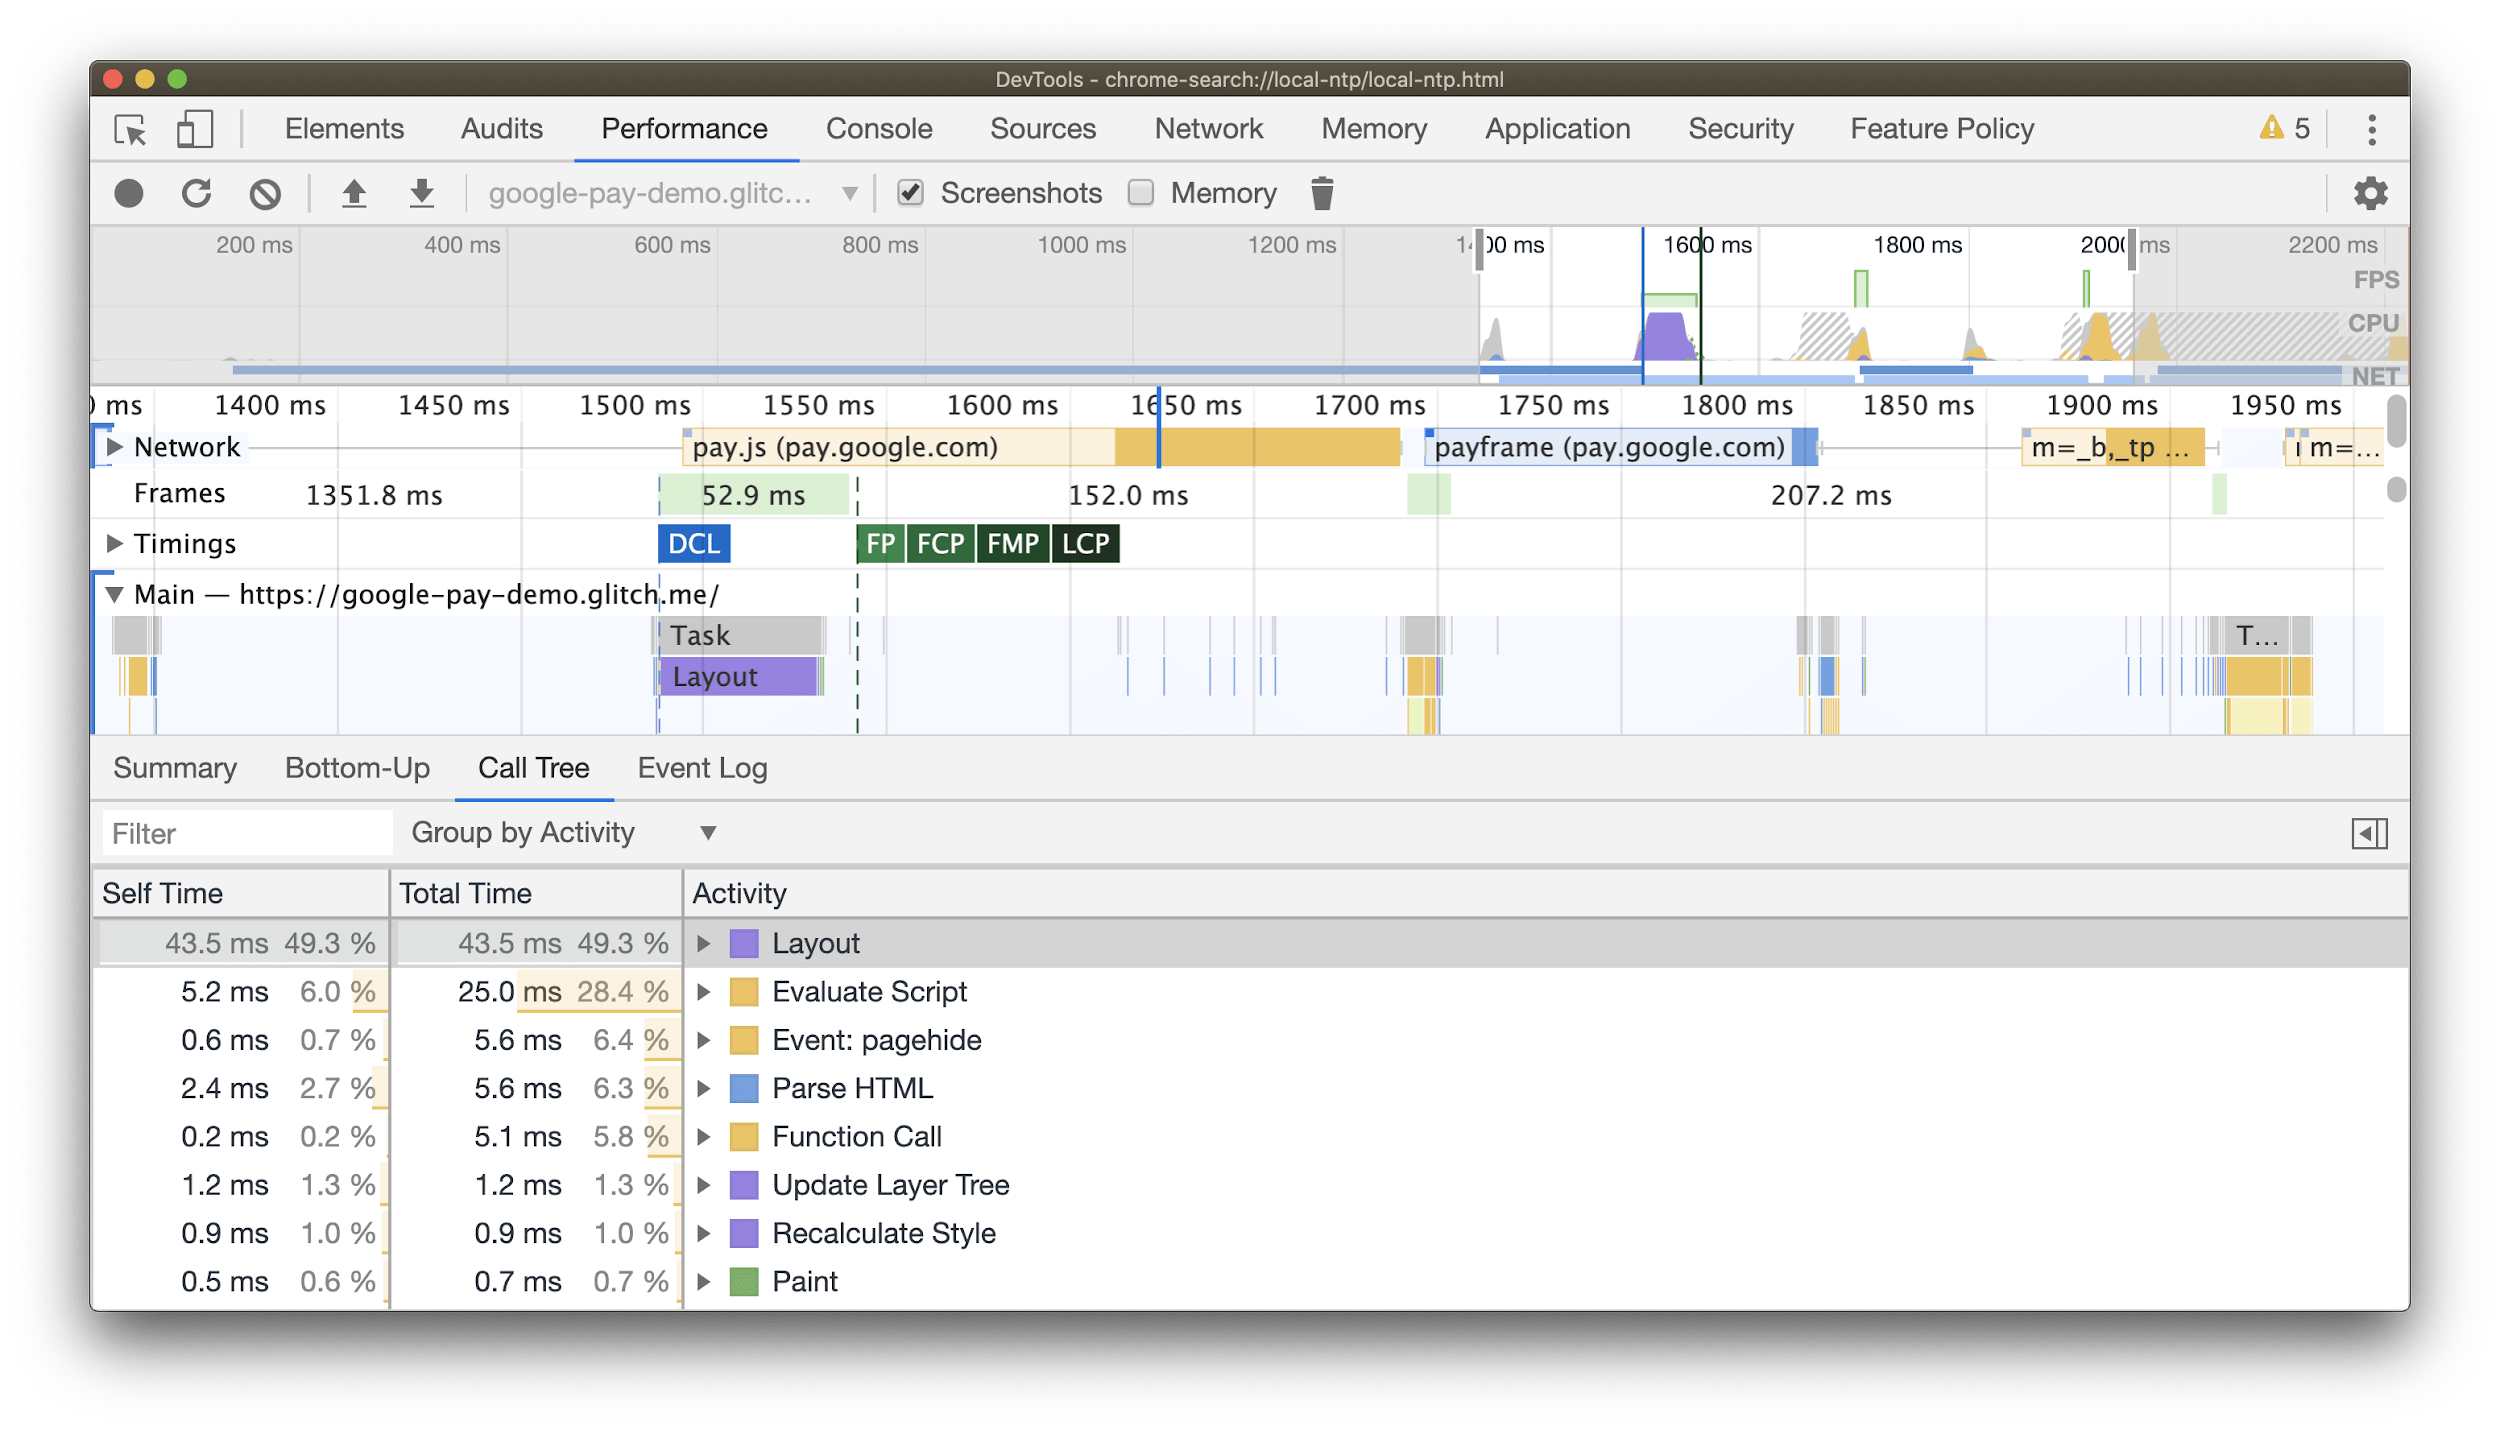 Screenshot of a DevTools performance profile from loading and rendering a page